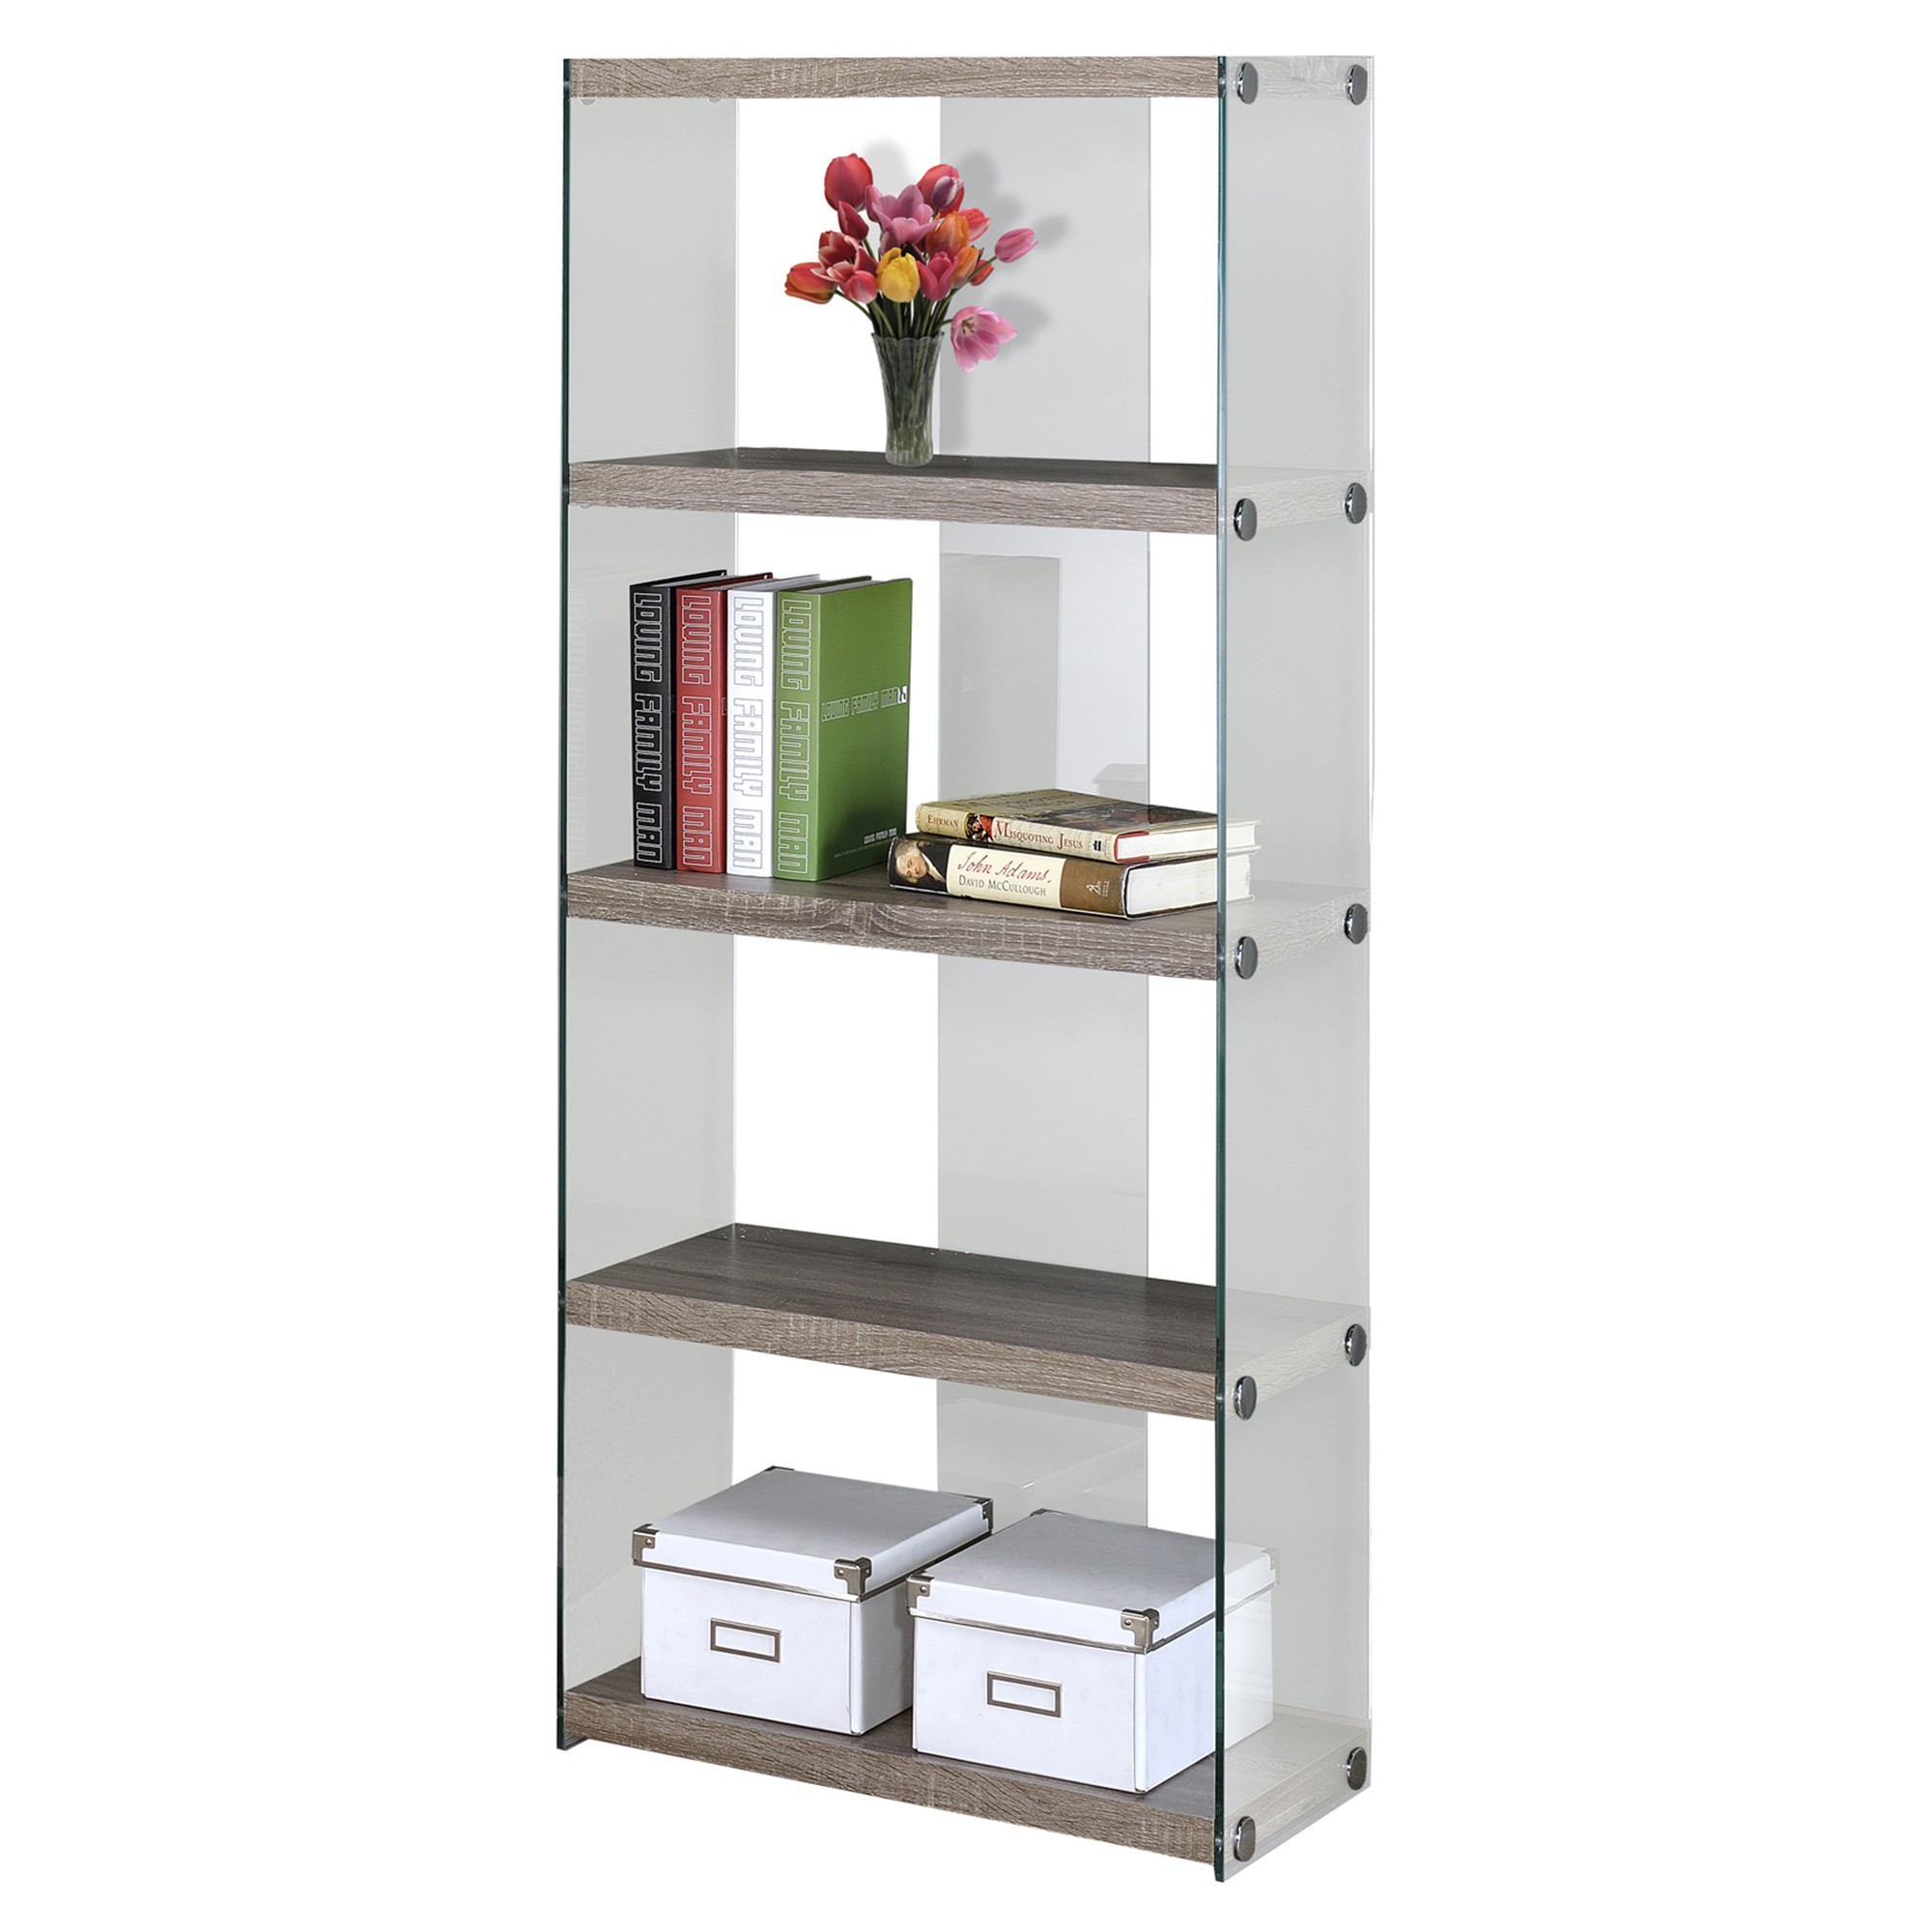 BOOKCASE - 60"H / DARK TAUPE WITH TEMPERED GLASS